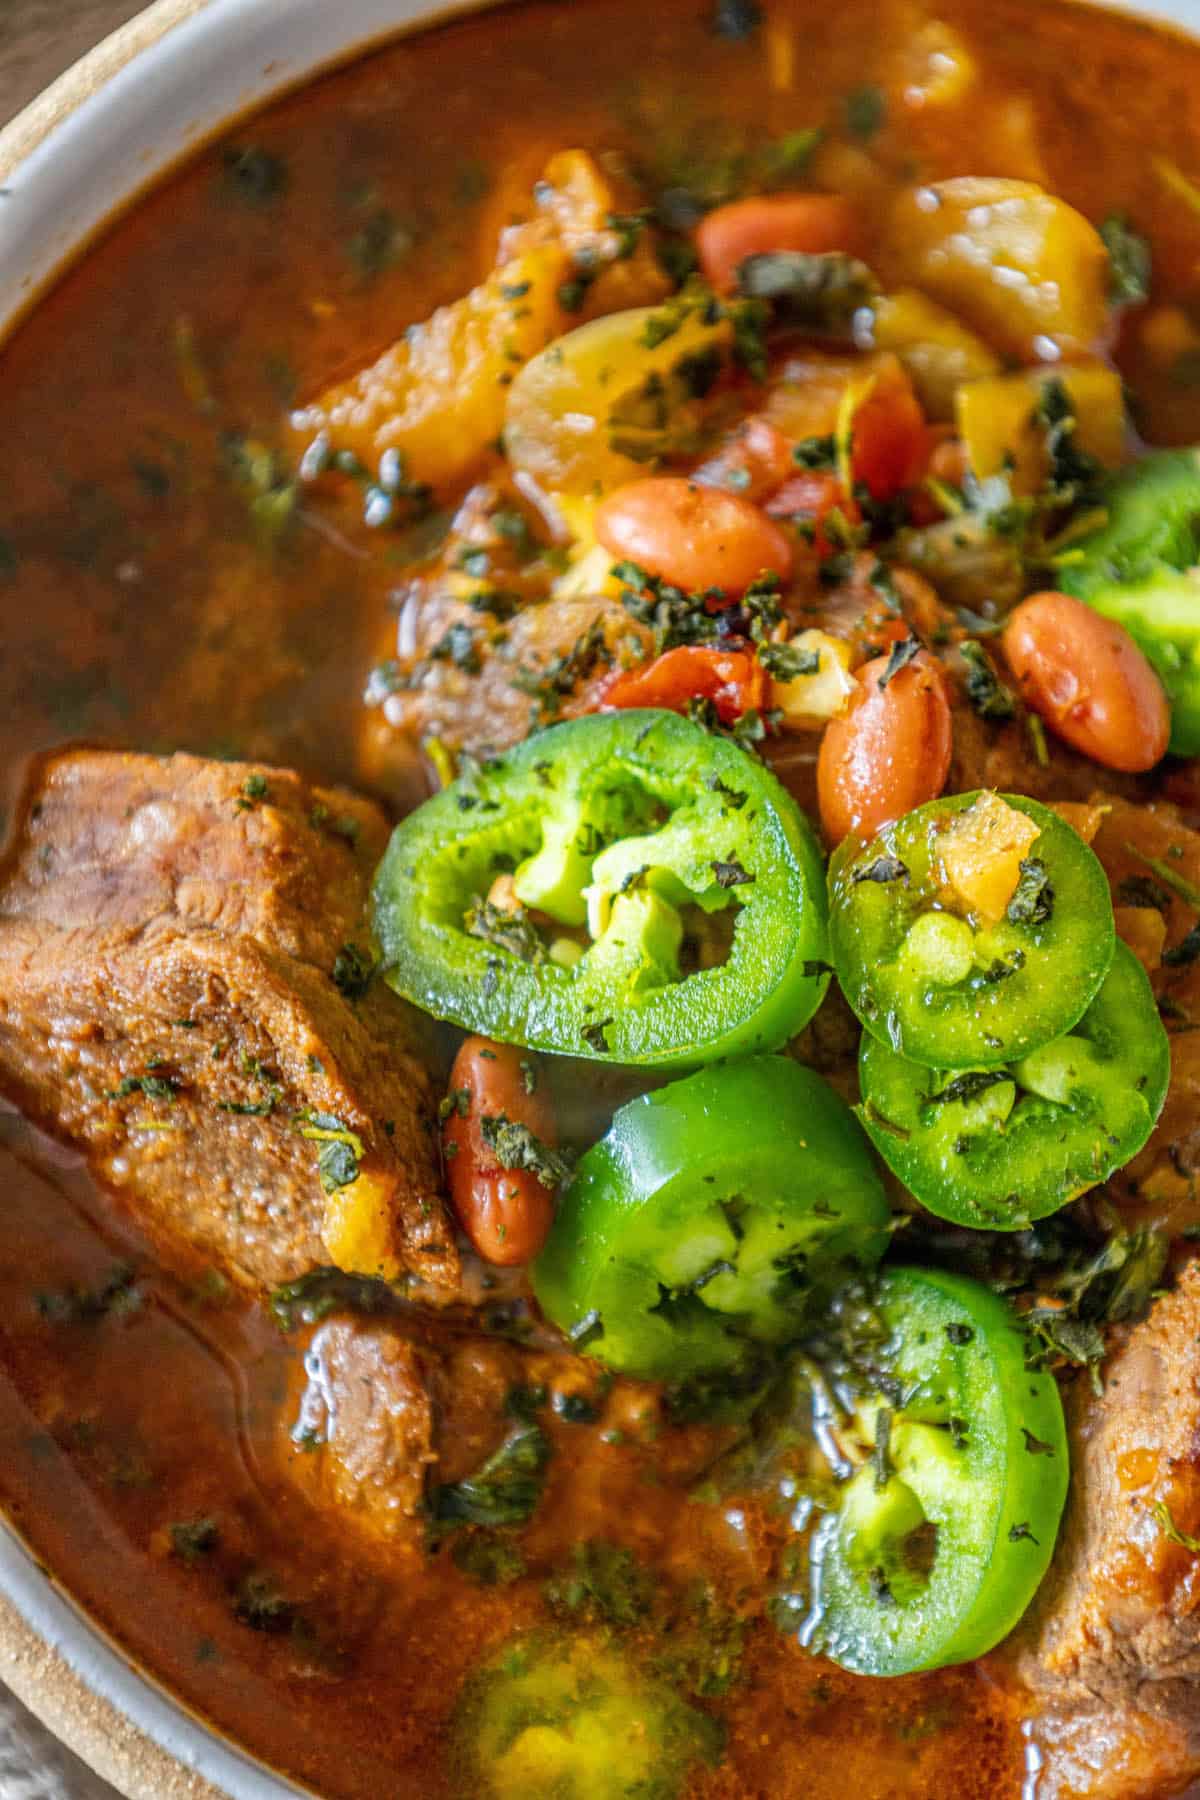 A spicy bowl of beef stew with peppers.